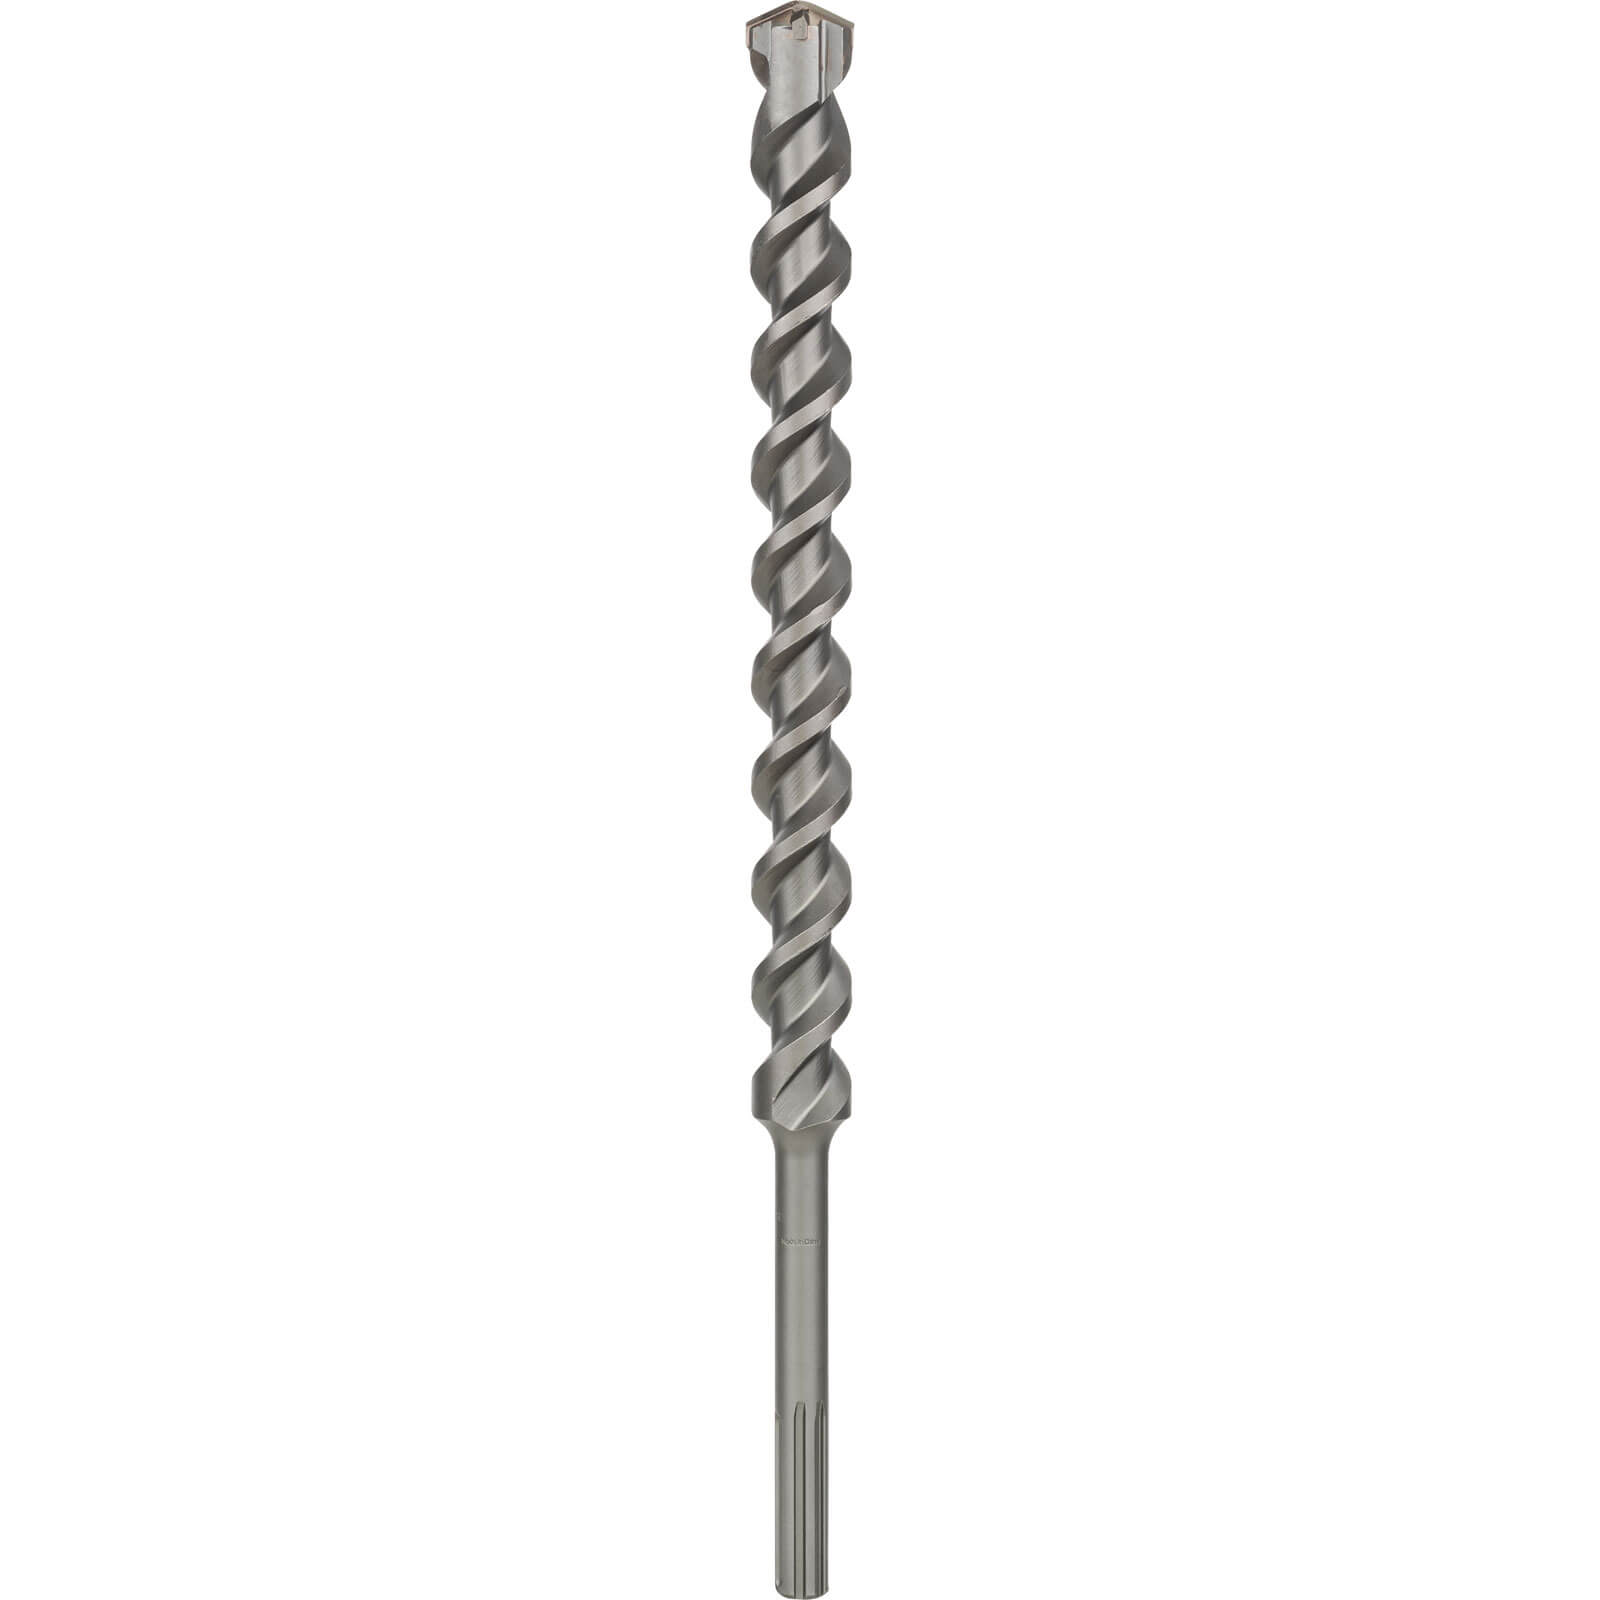 Image of Bosch M4 SDS Max Masonry Drill Bit 35mm 520mm Pack of 1